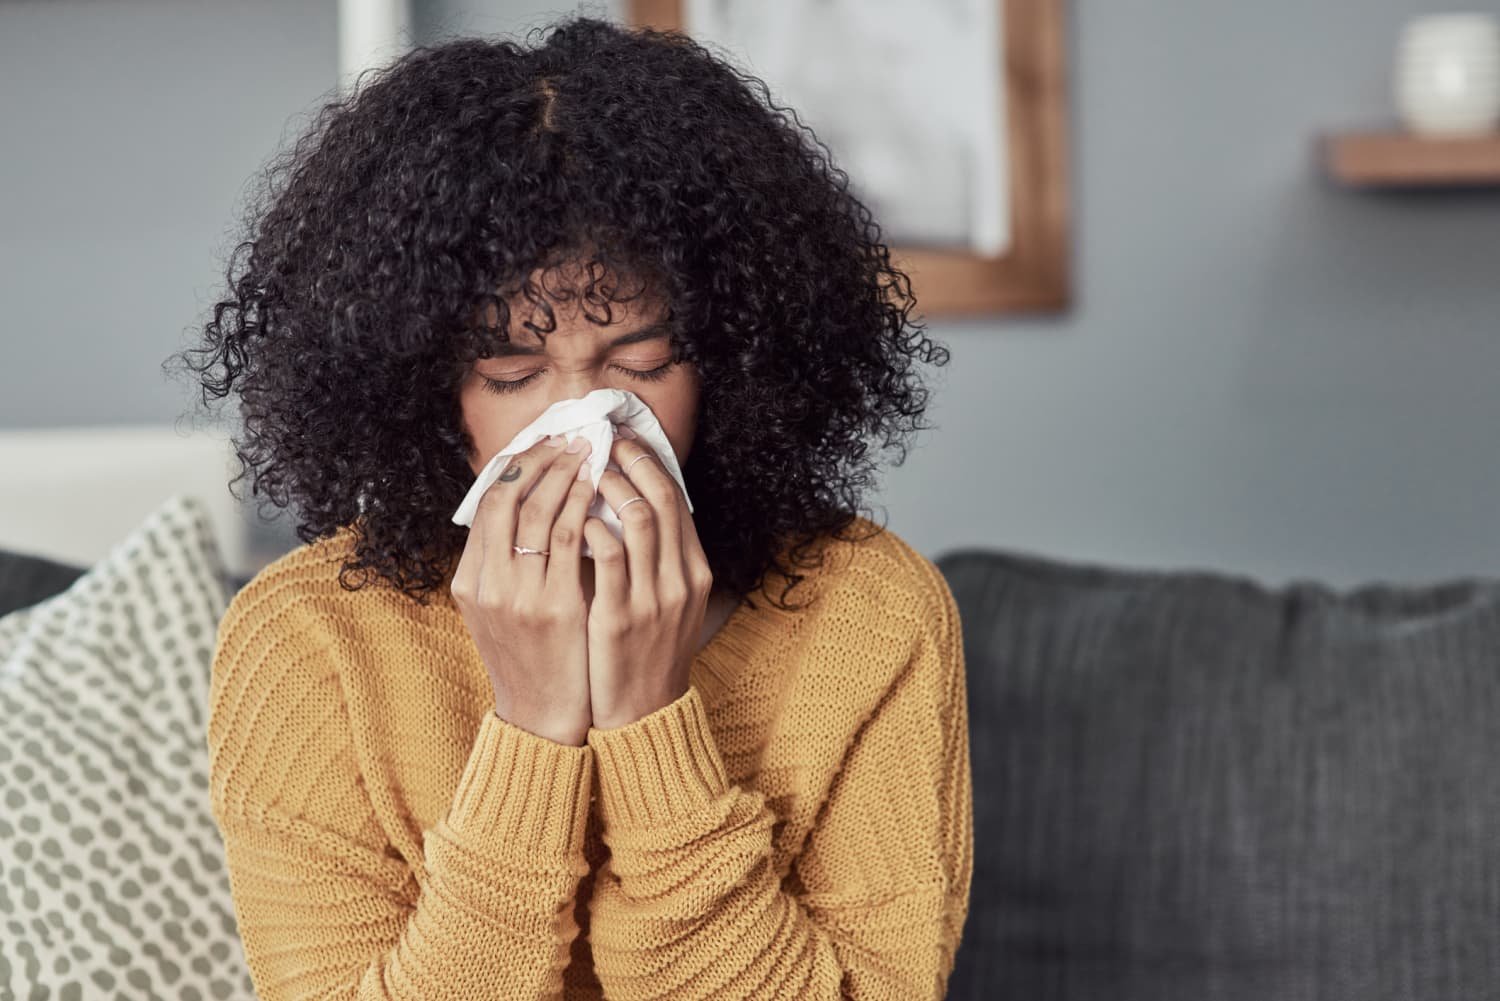 9 Easy Home Tips and Hacks for People Who Can’t Stop Sneezing Inside